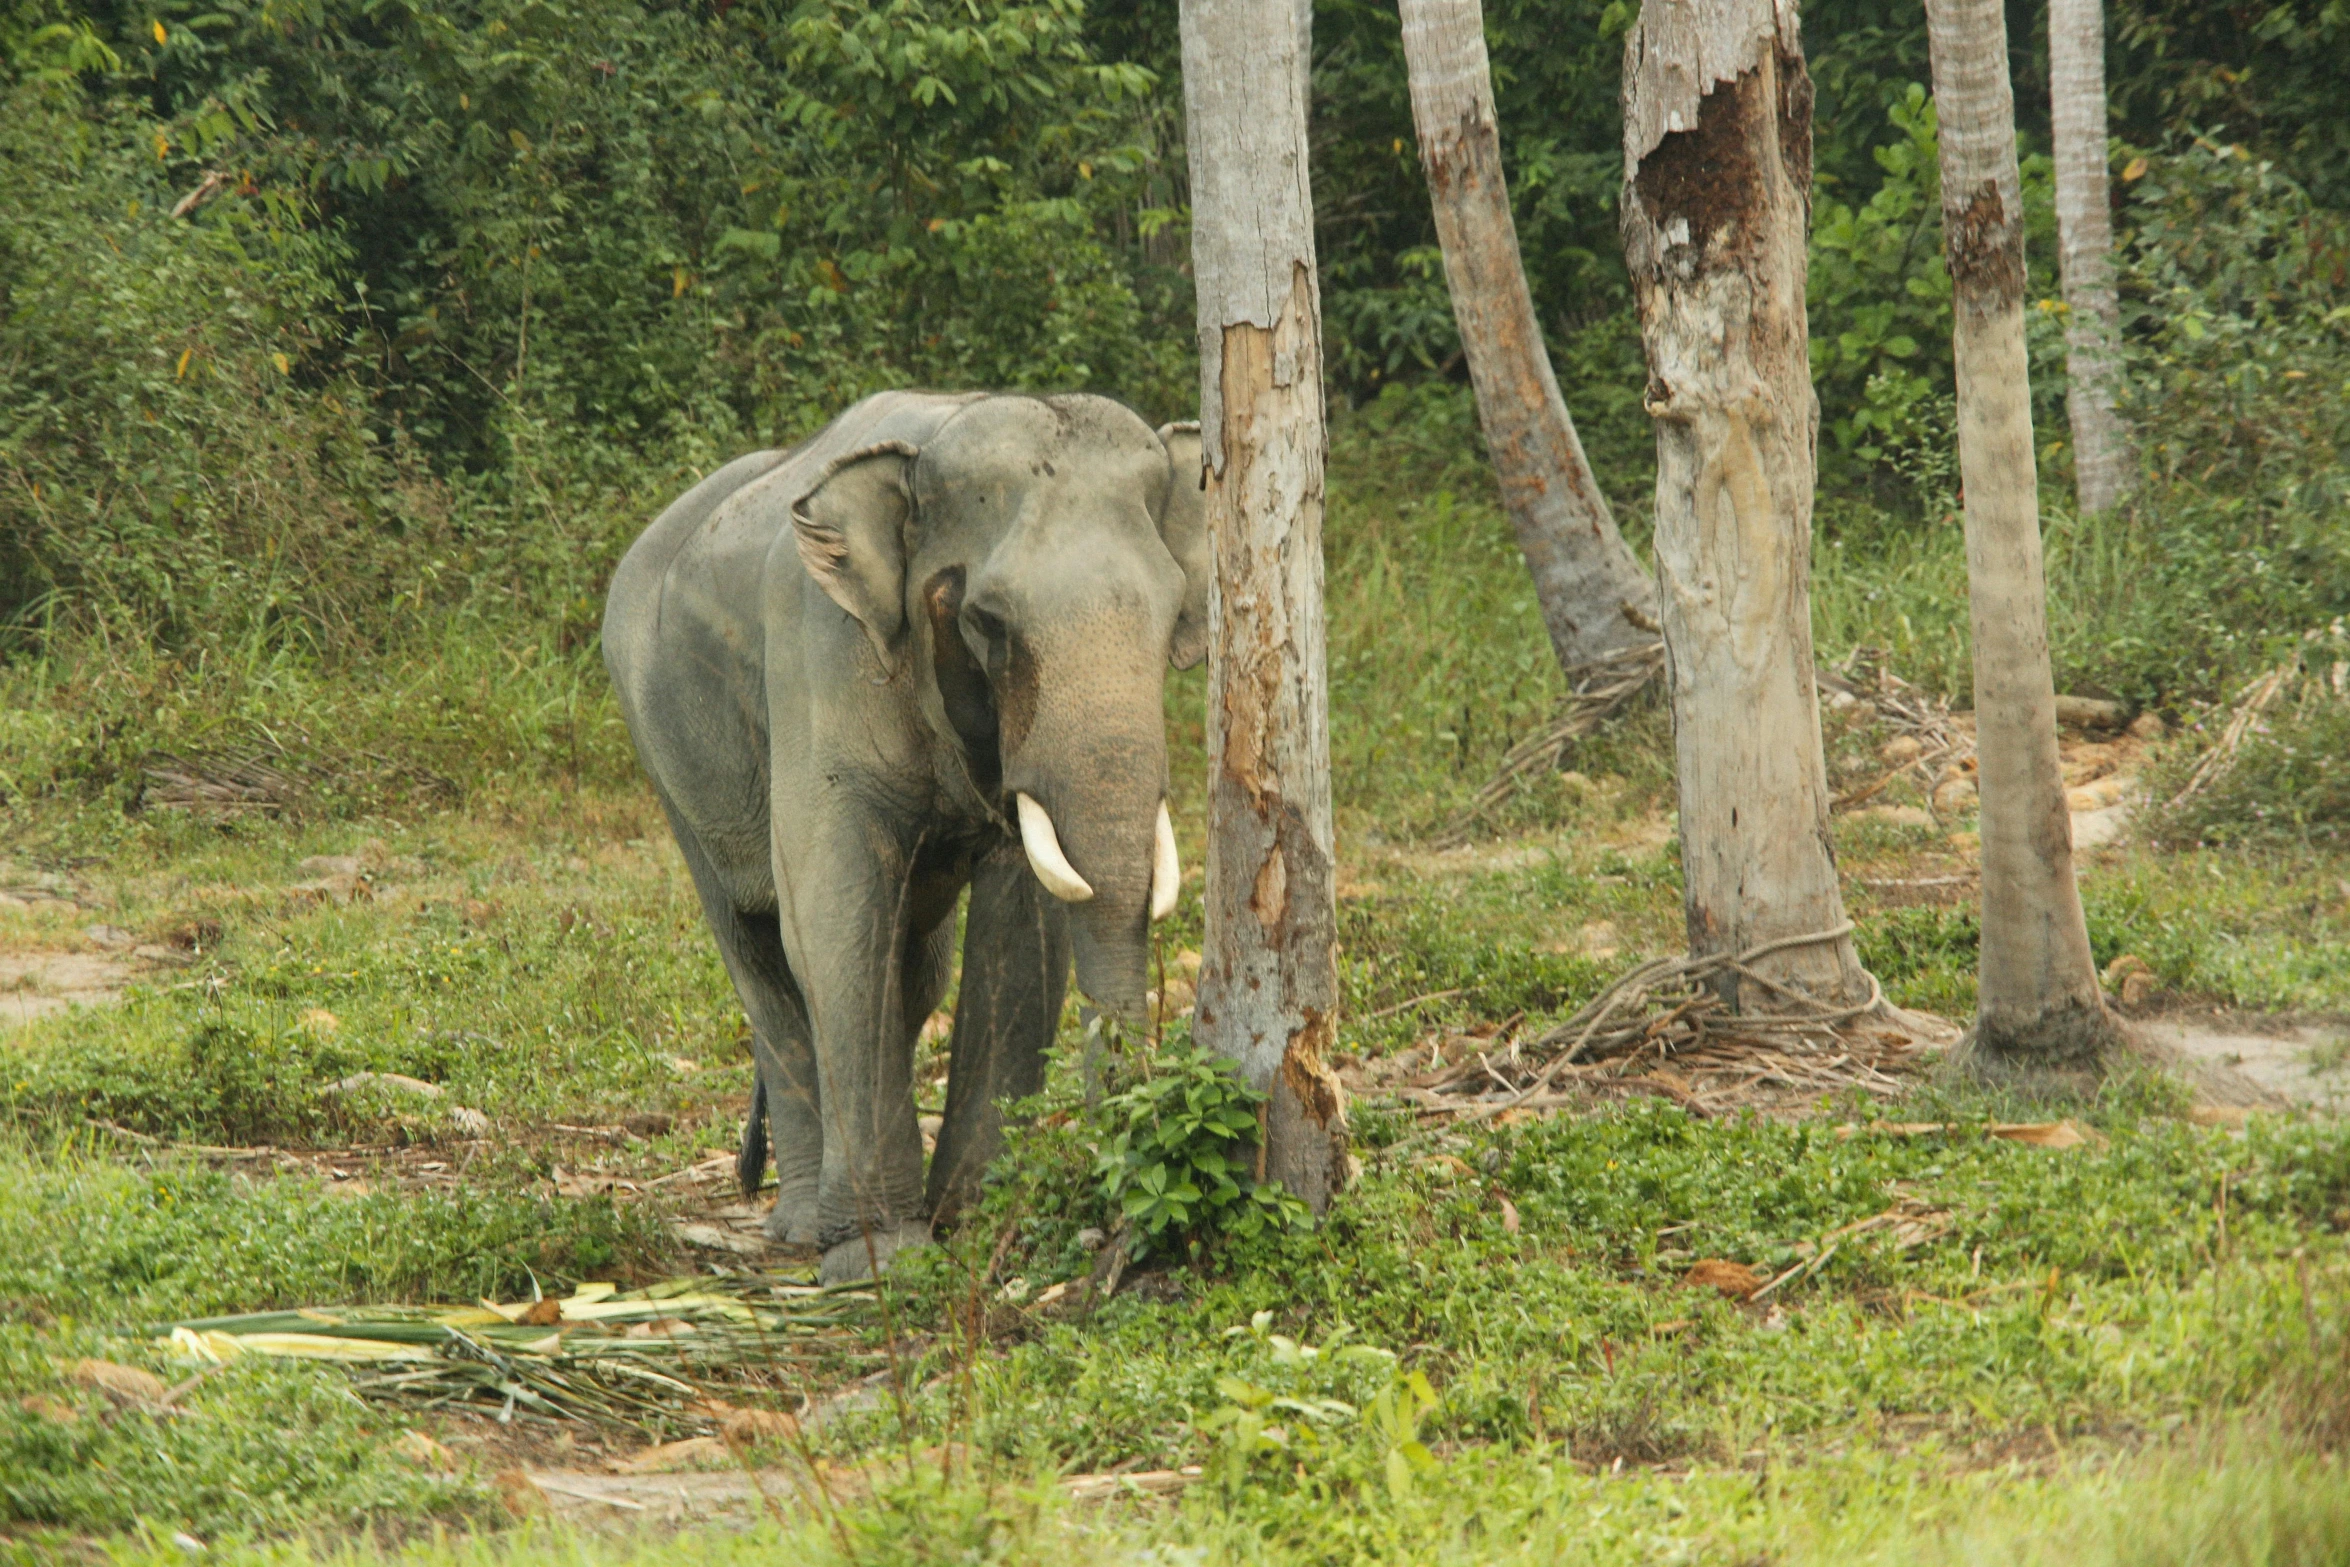 an elephant standing next to some very tall trees